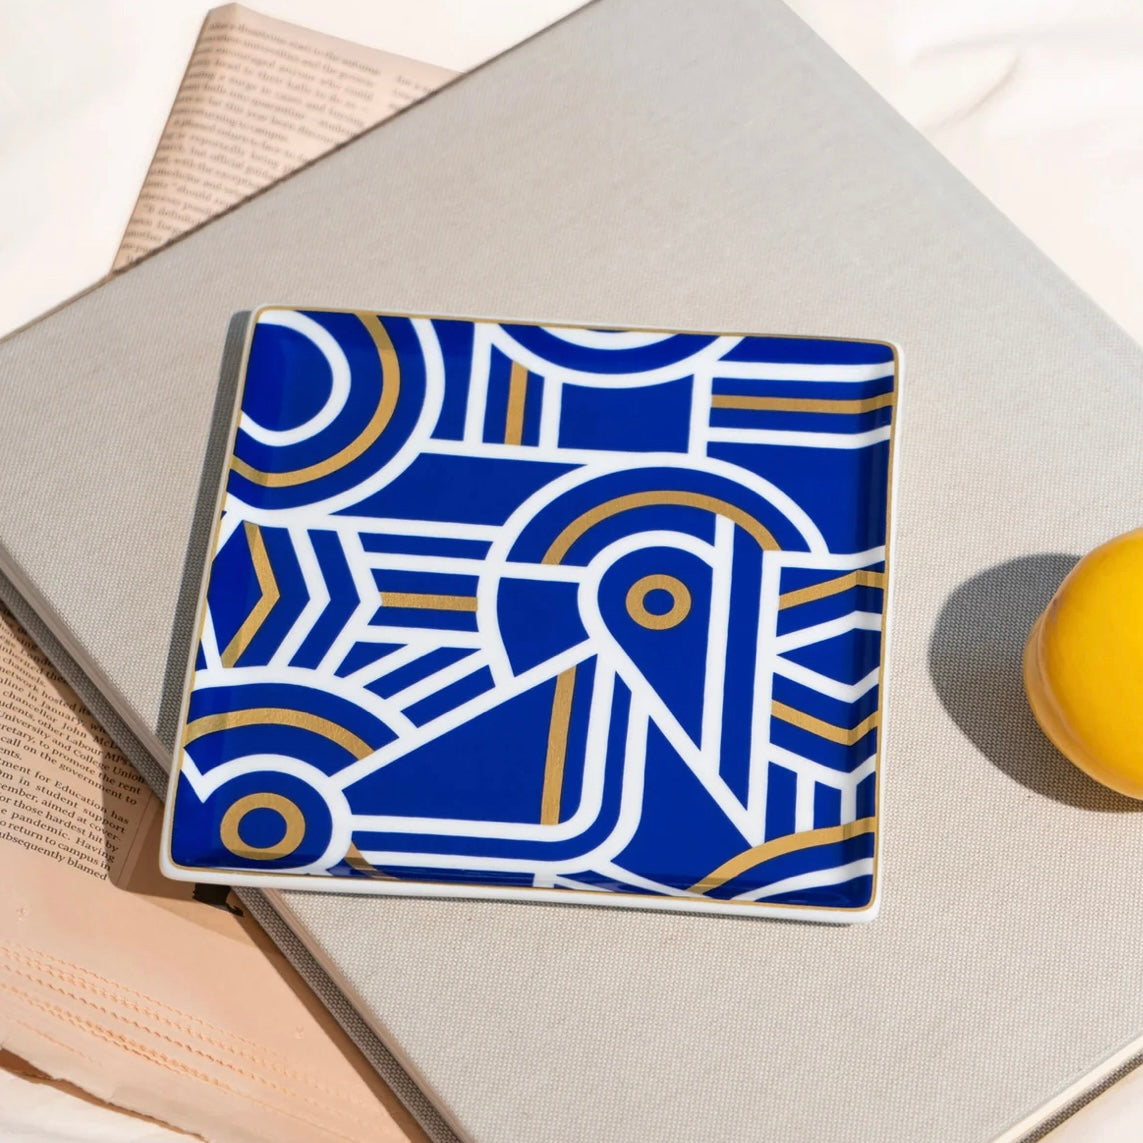 Olimpo-ceramic-tray-inna-carton-gift-ideas-gifts-Birthday-best-shop-online-Dubai-UAE-for-her-customized-Shops-UAE-supplier-shop-package-packaging-1